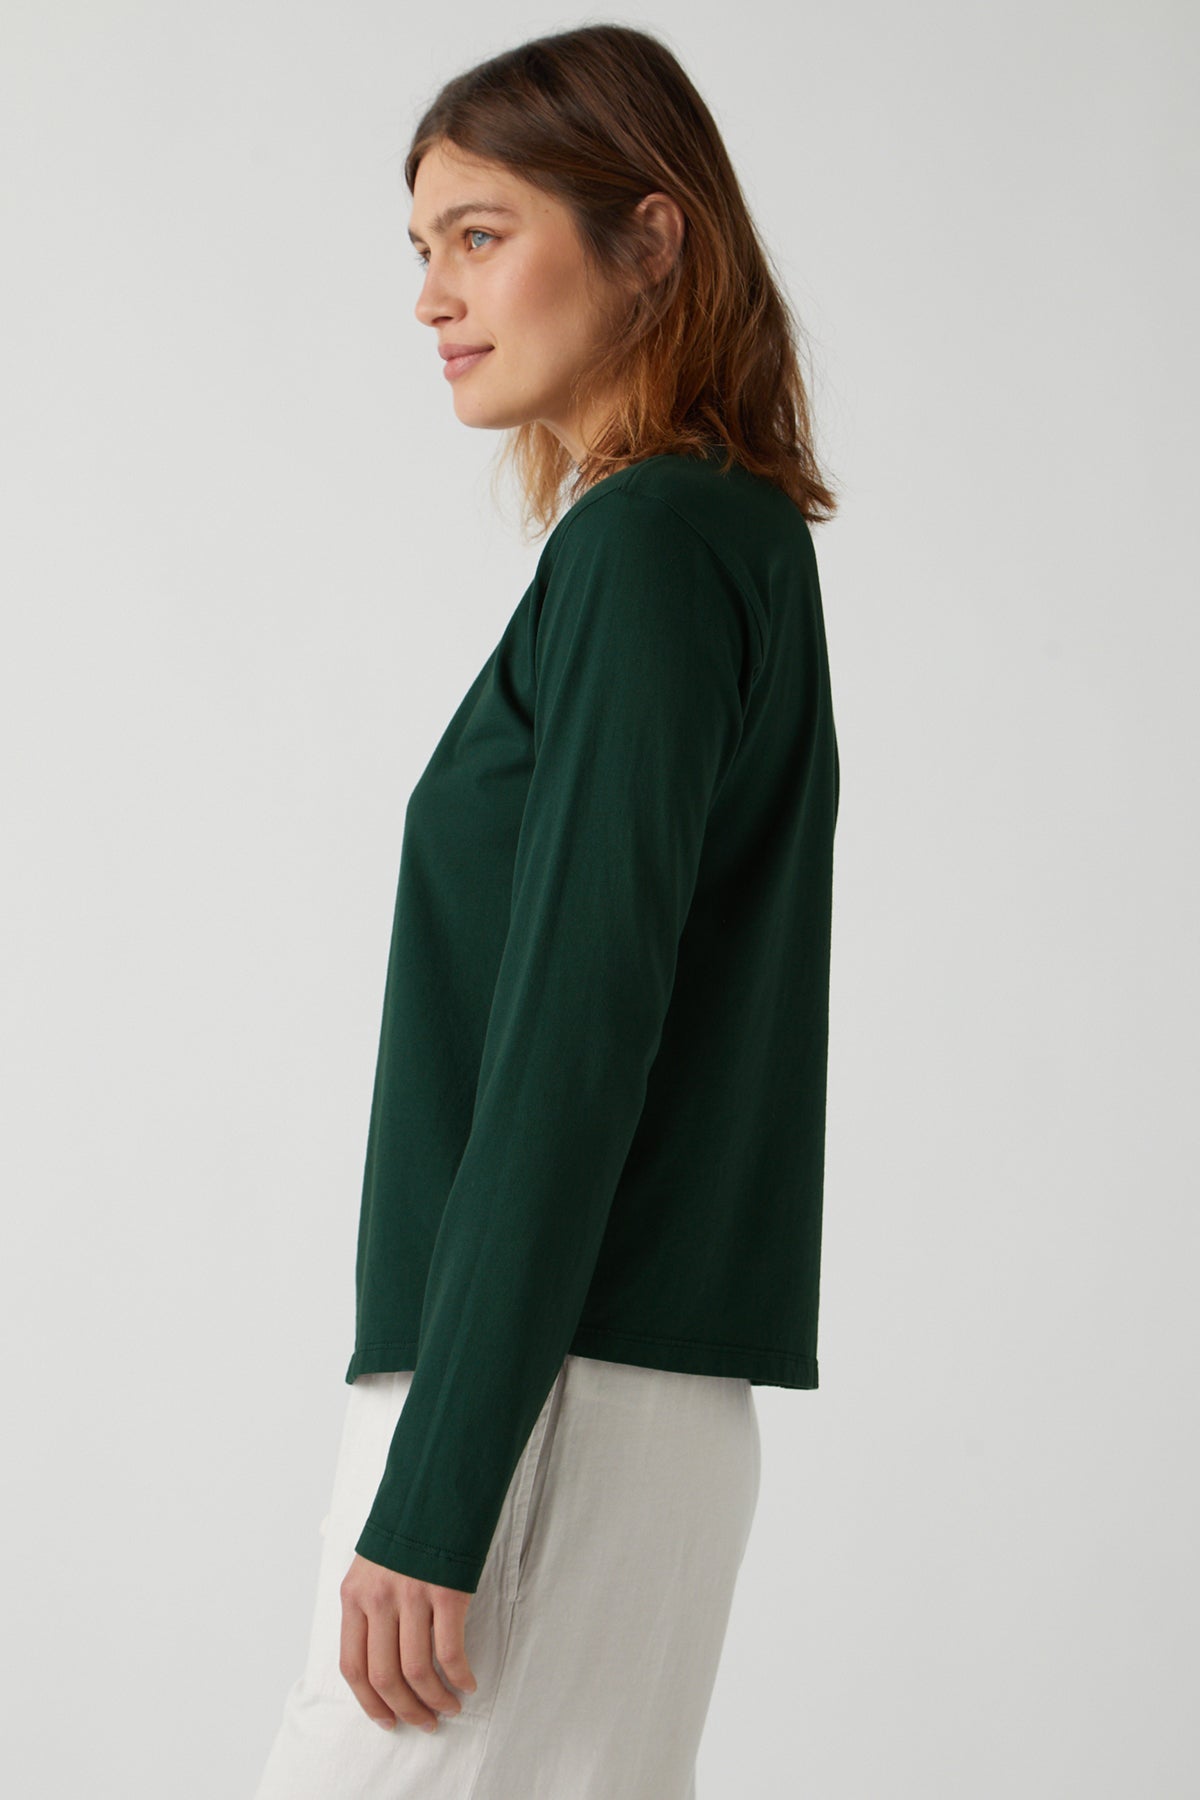 Vicente Tee in forest green side-25484347179201